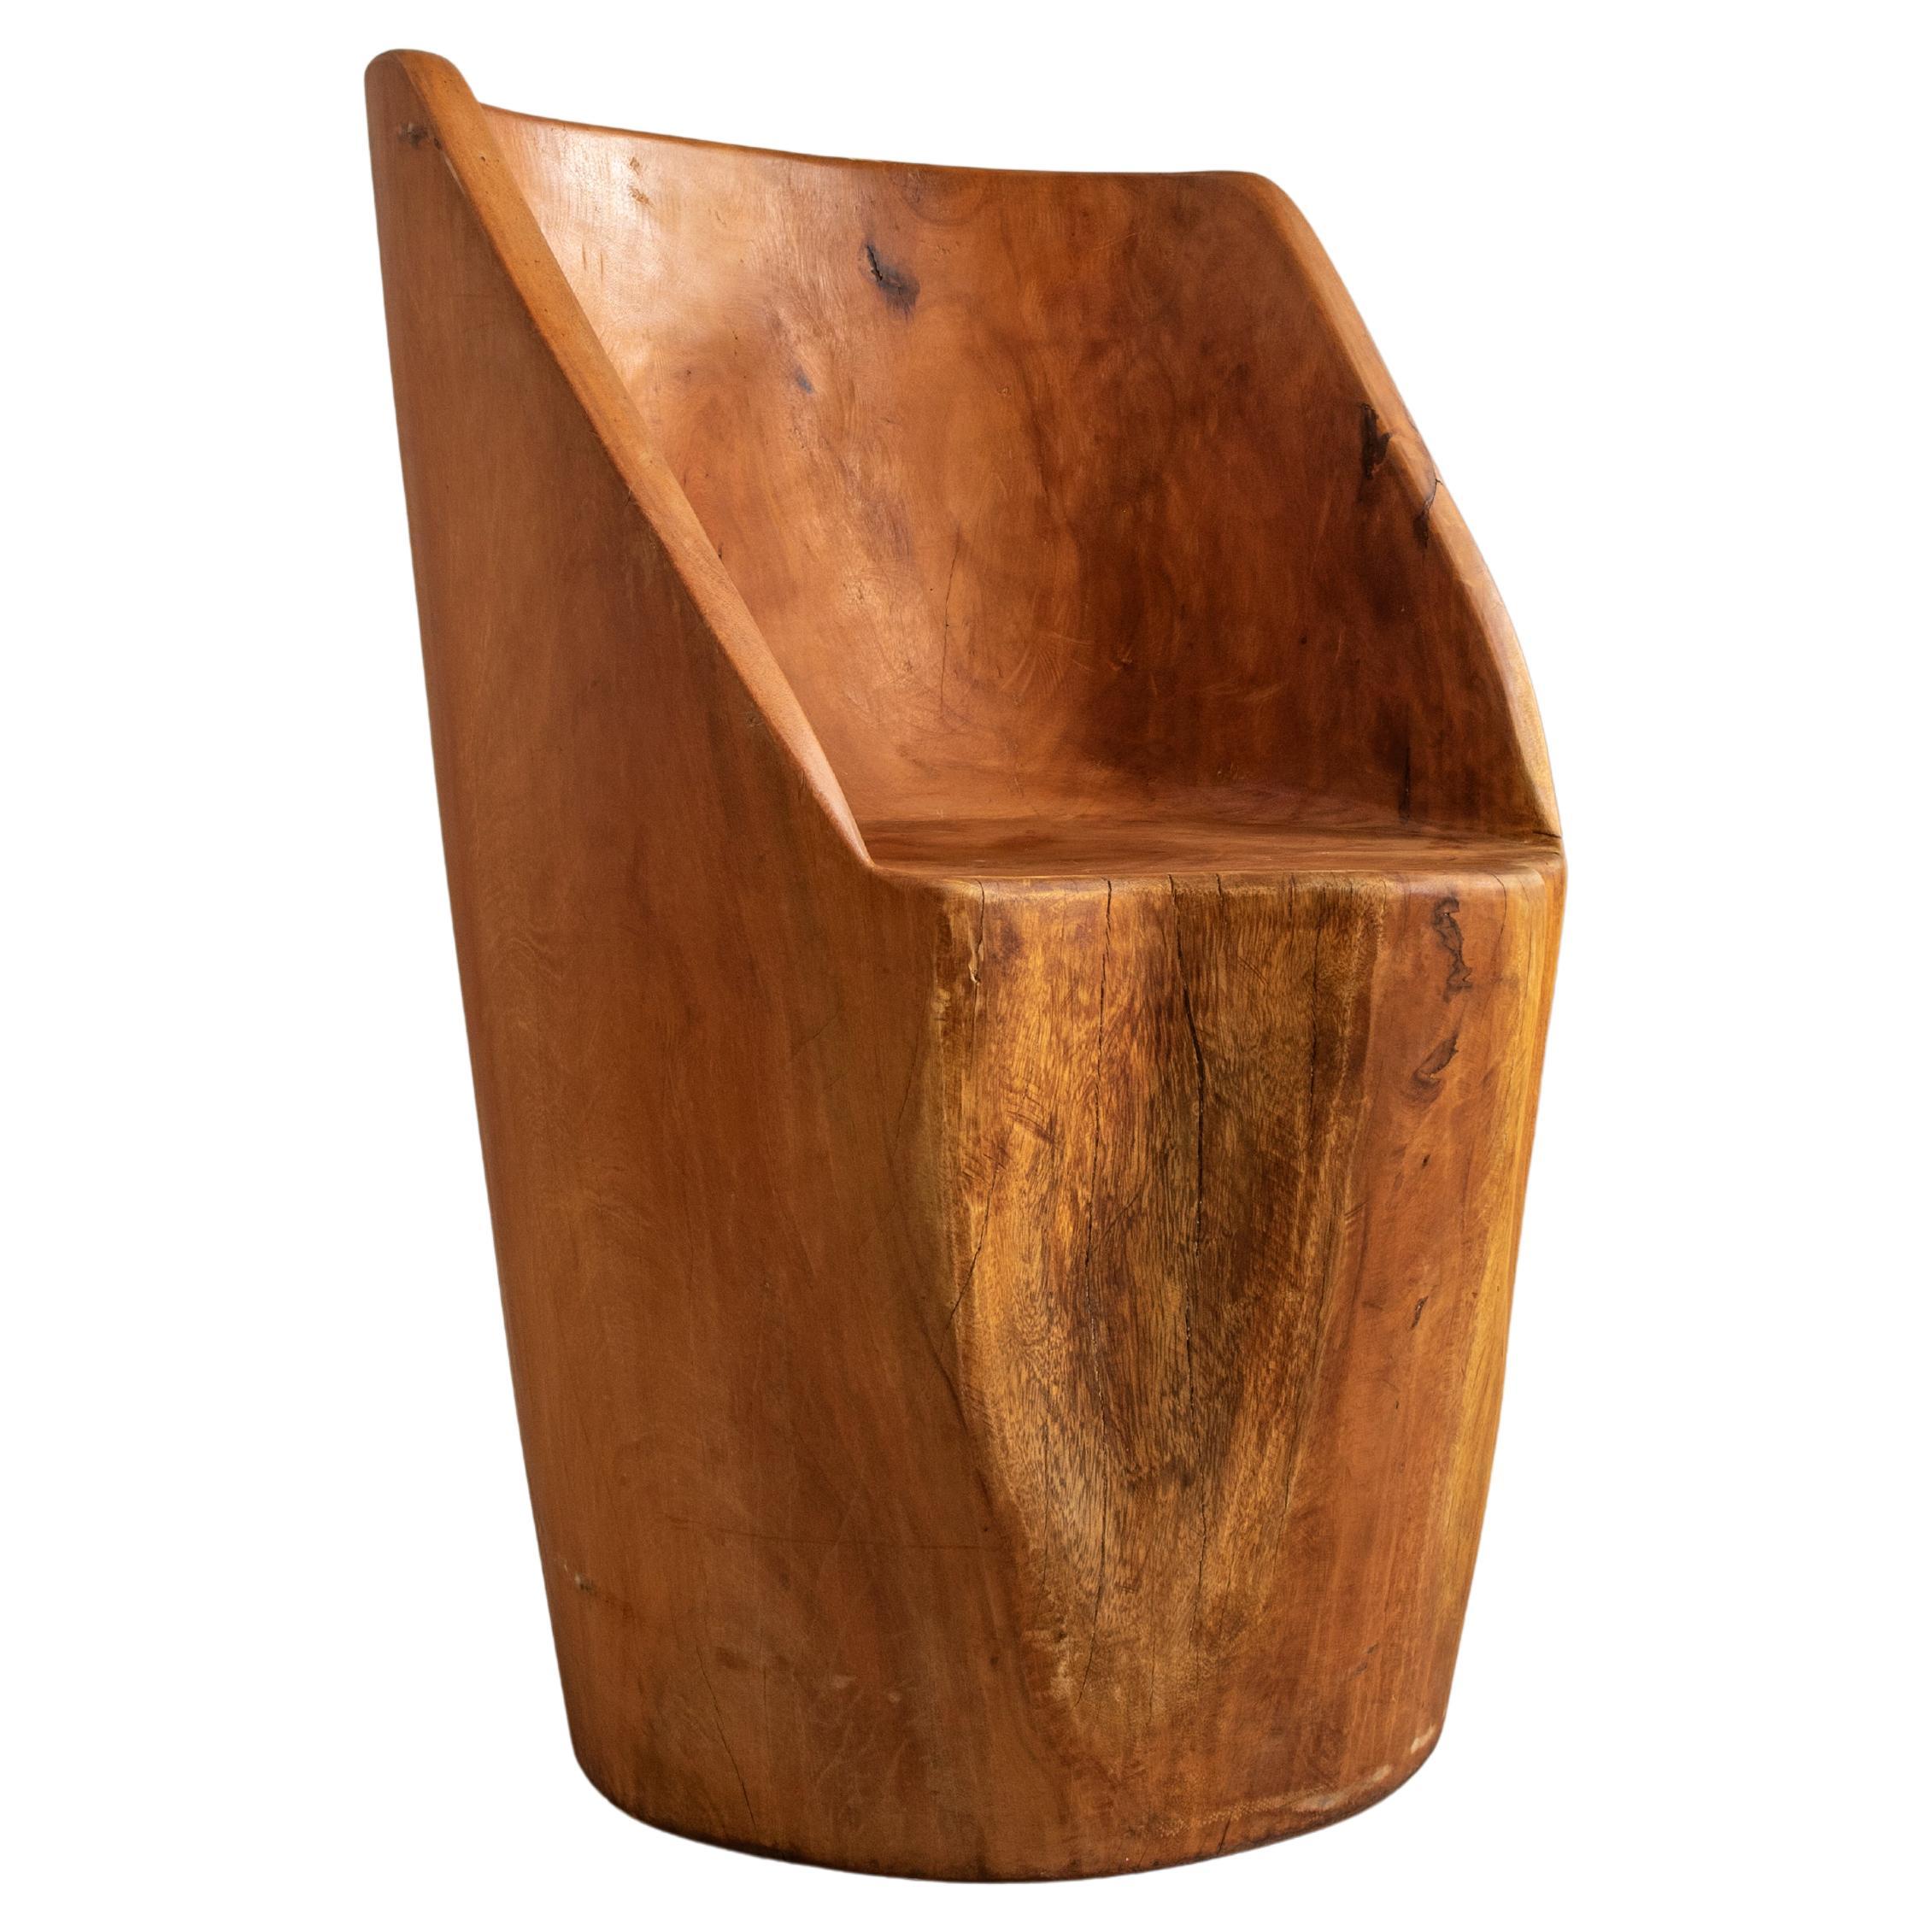 'Pilão' Chair in Solid Brazilian Hardwood, in the Style of Zanine Caldas